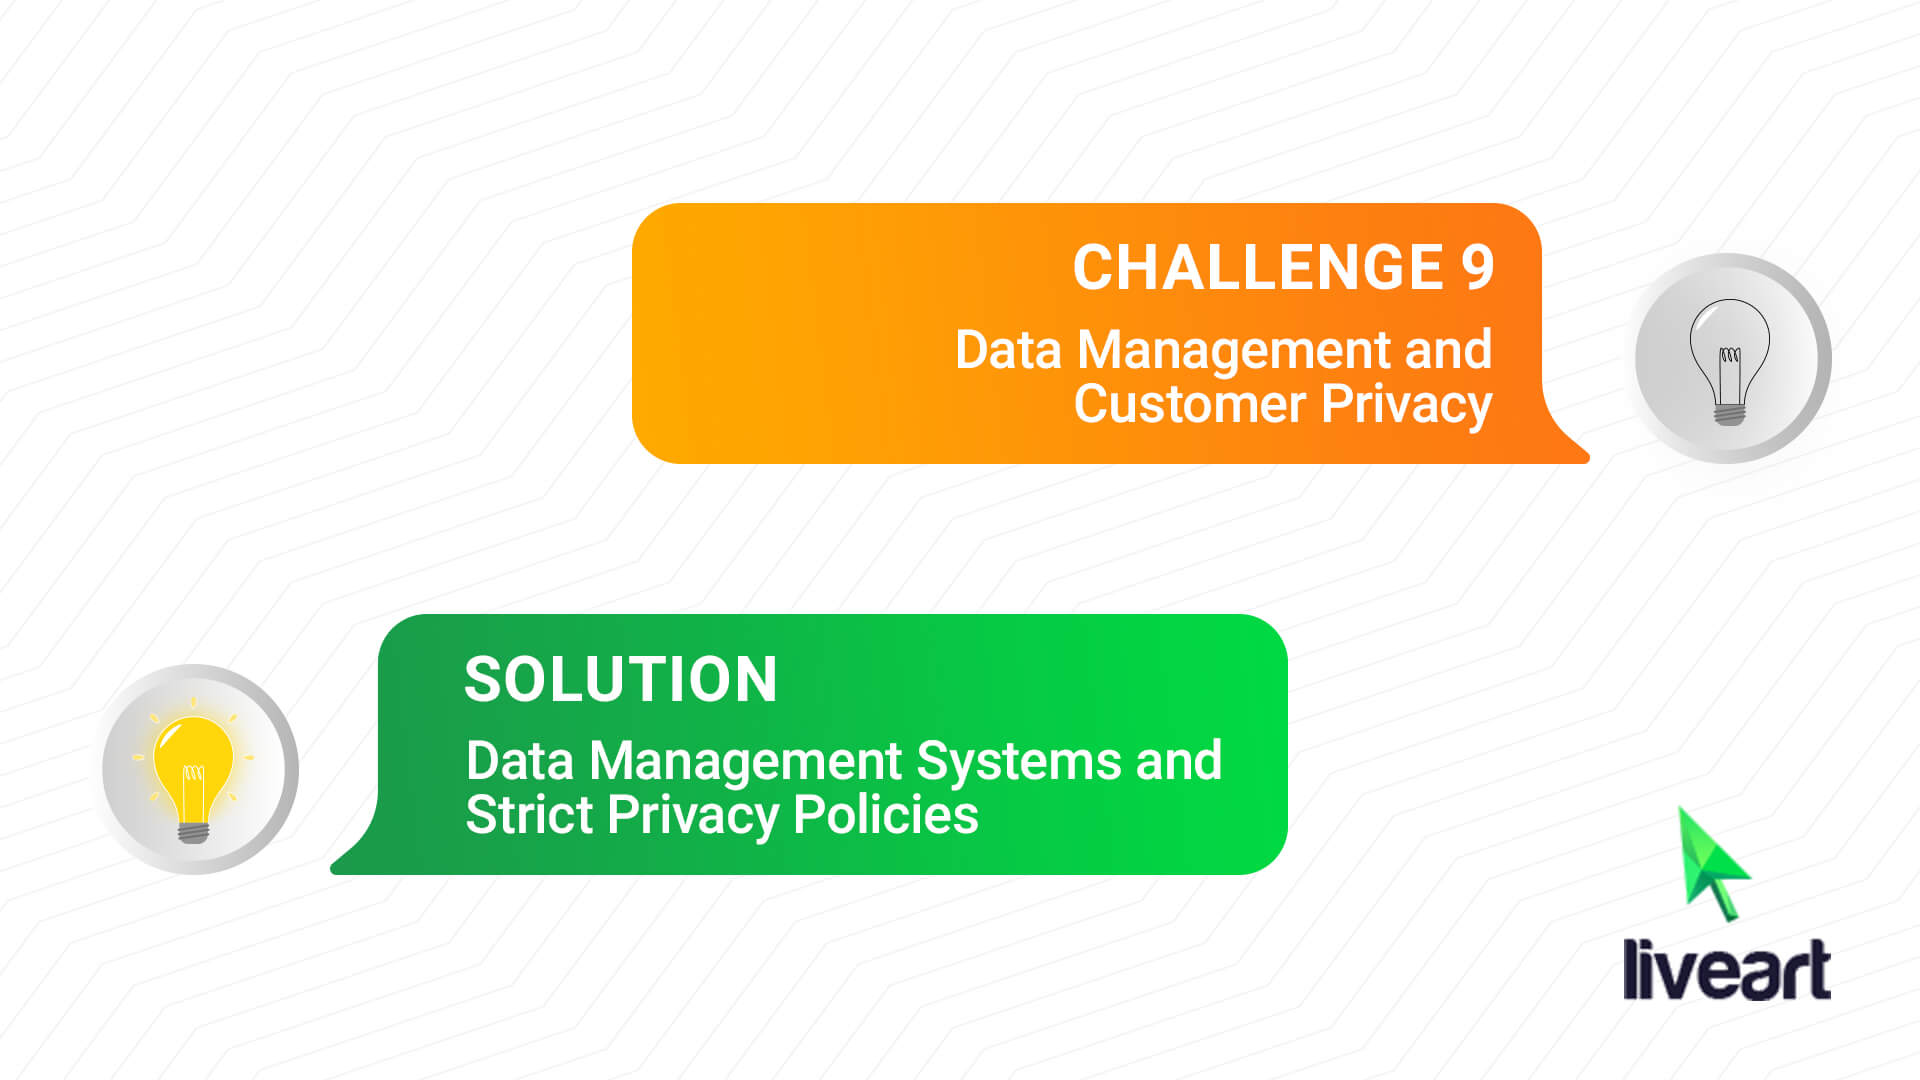 Challenge 9: Data Management and Customer Privacy